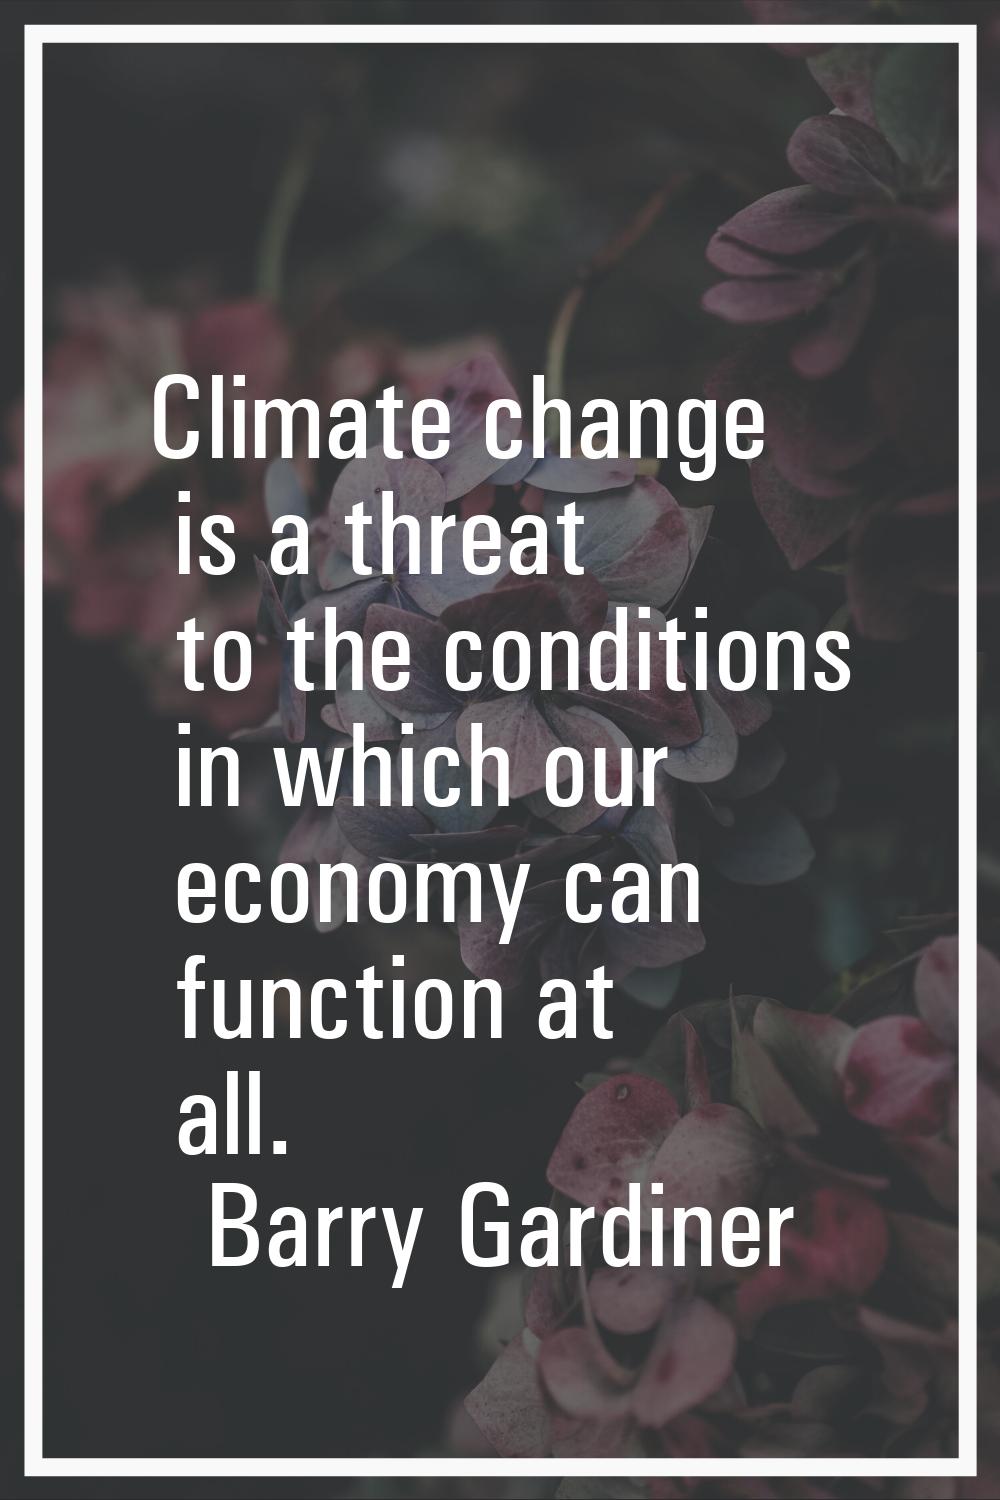 Climate change is a threat to the conditions in which our economy can function at all.